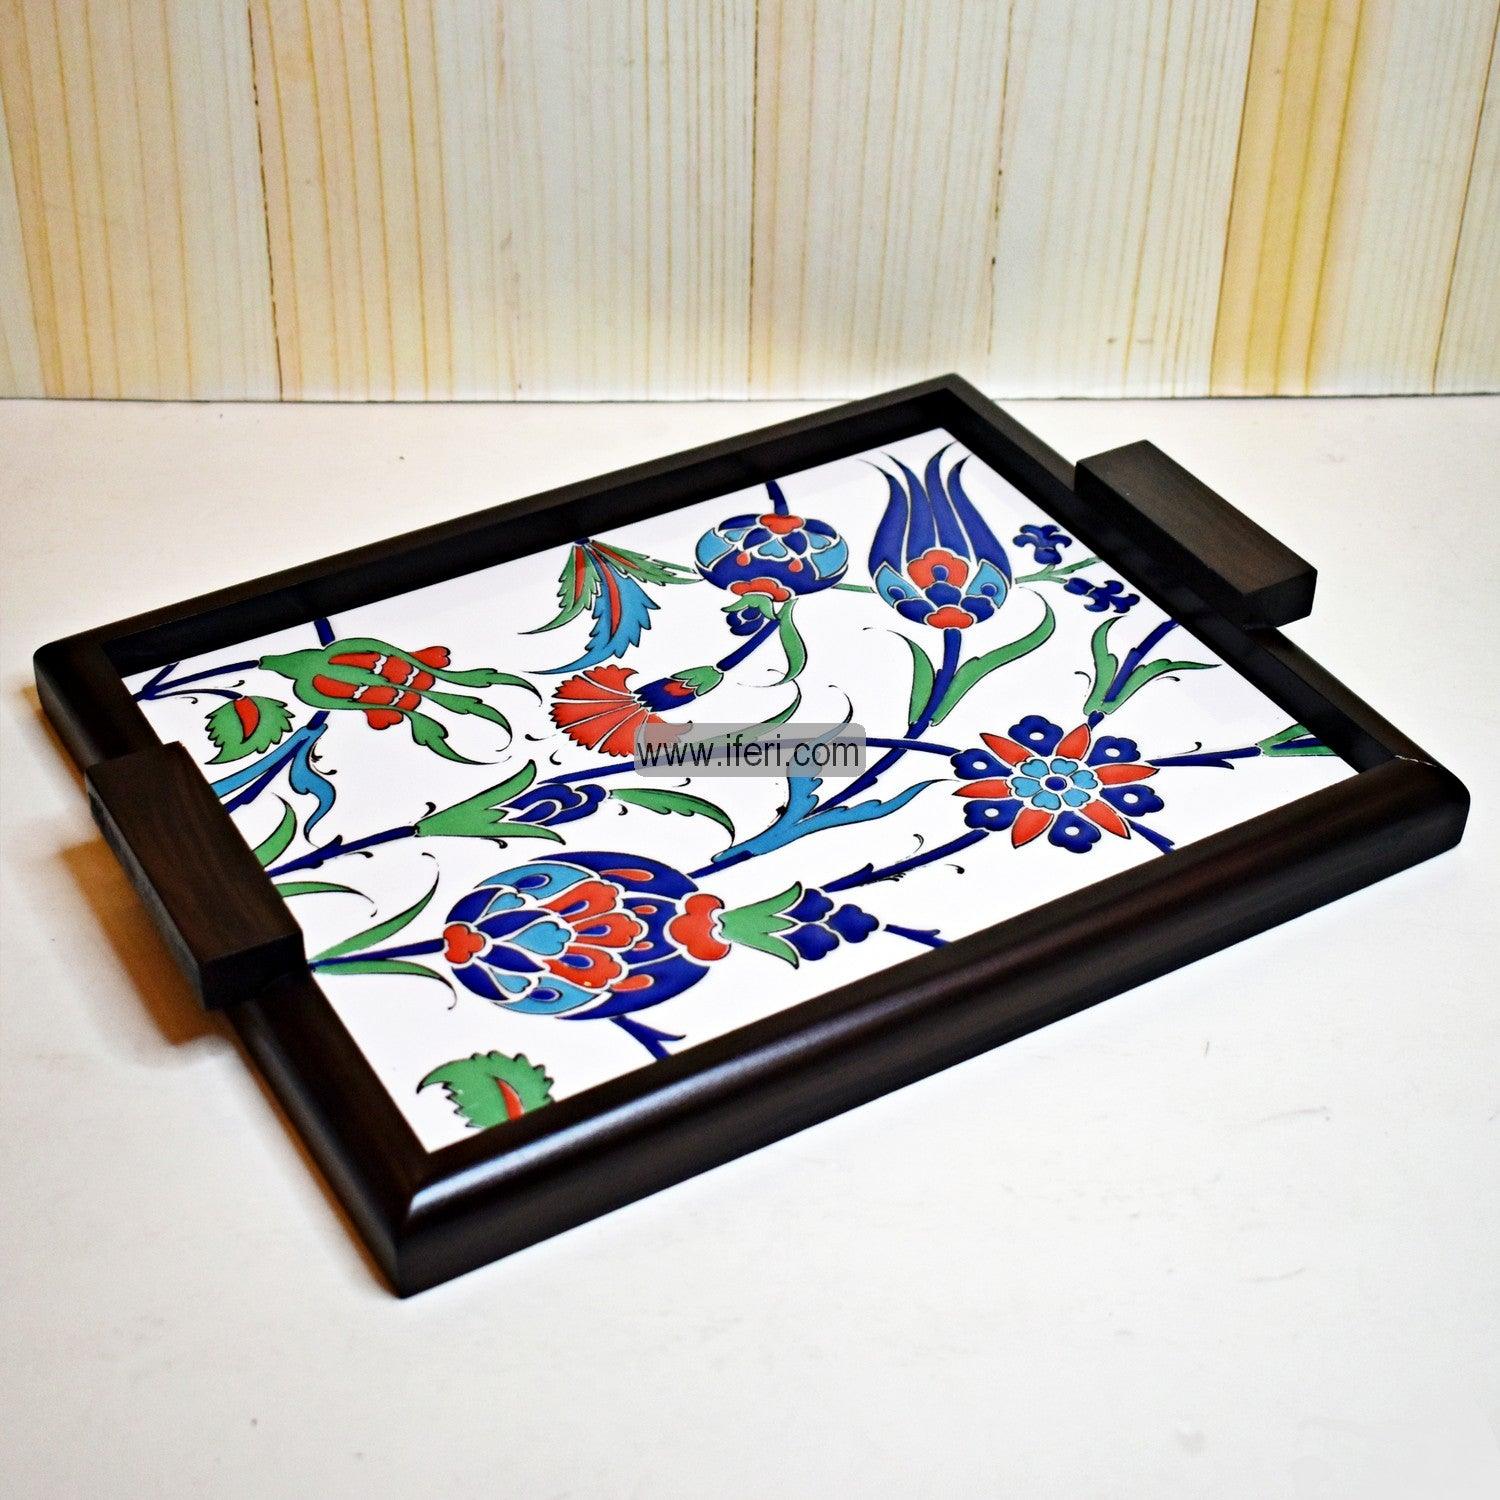 15.5 Inch Wooden and Ceramic Turkish Serving Tray, Tile Tray 